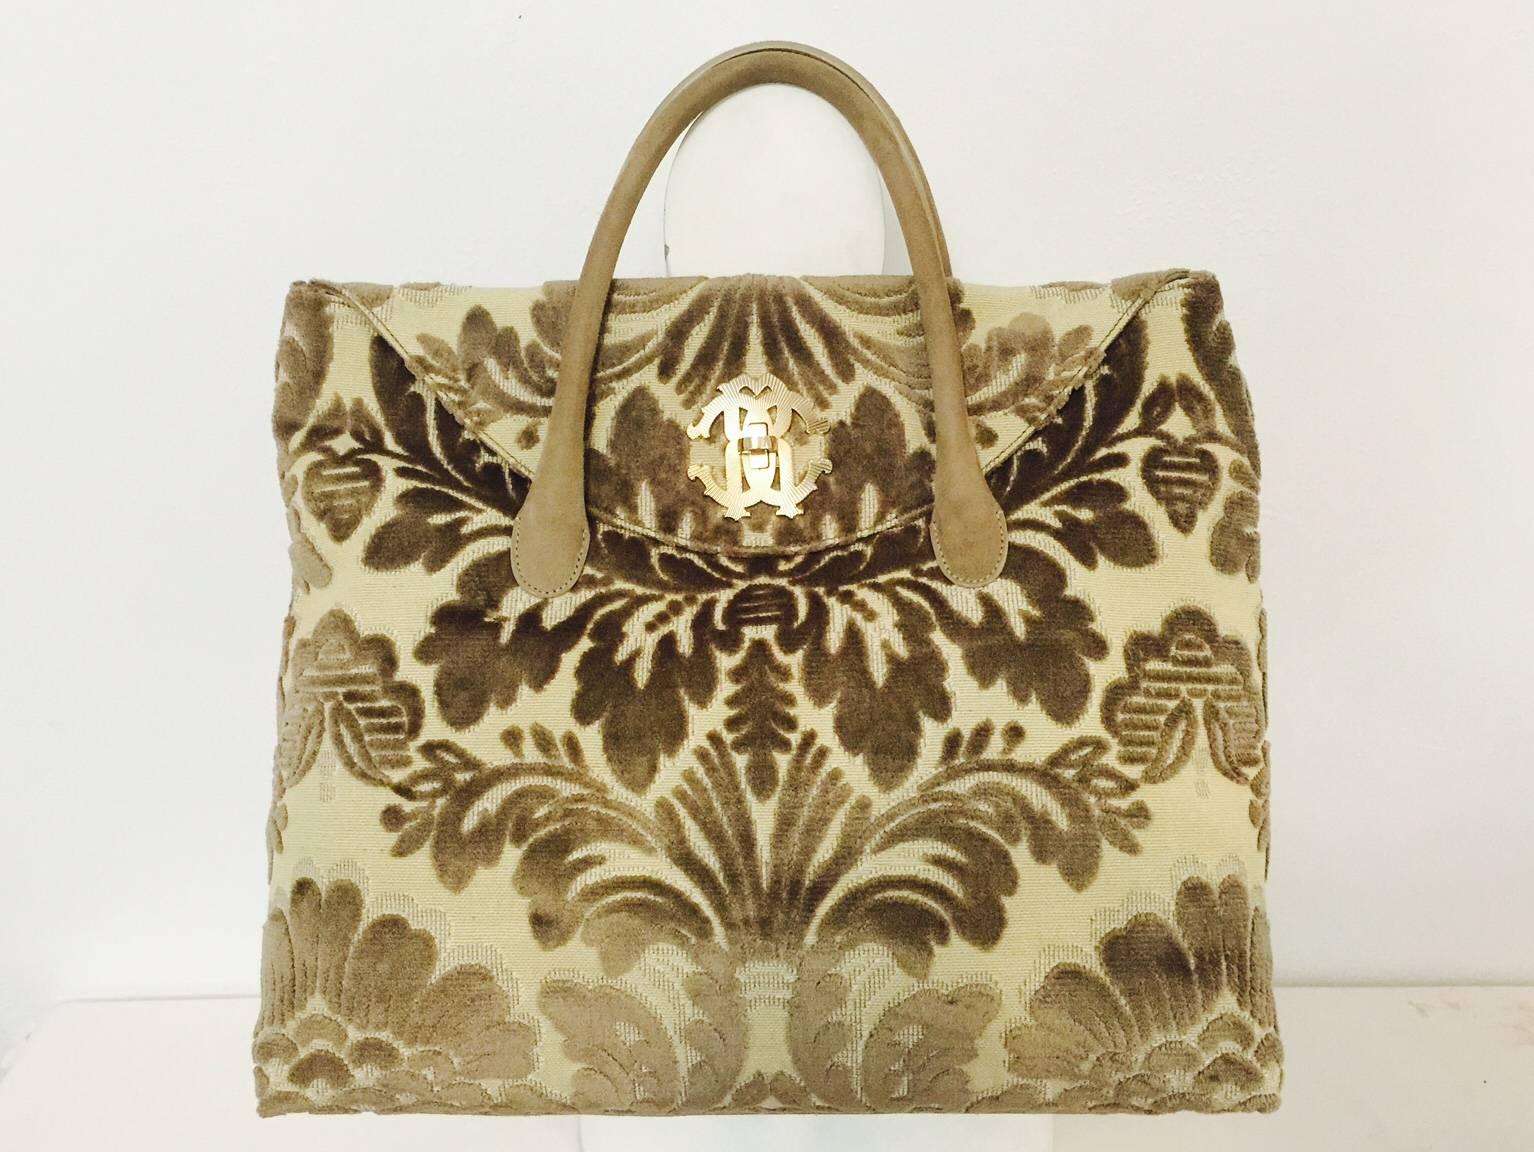 New Roberto Cavalli Moss Velvet Carpet Bag is reminiscent of priceless tapestries and 19th Century totes carried by industrialists heading South during Reconstruction.  Features Moss green floral 